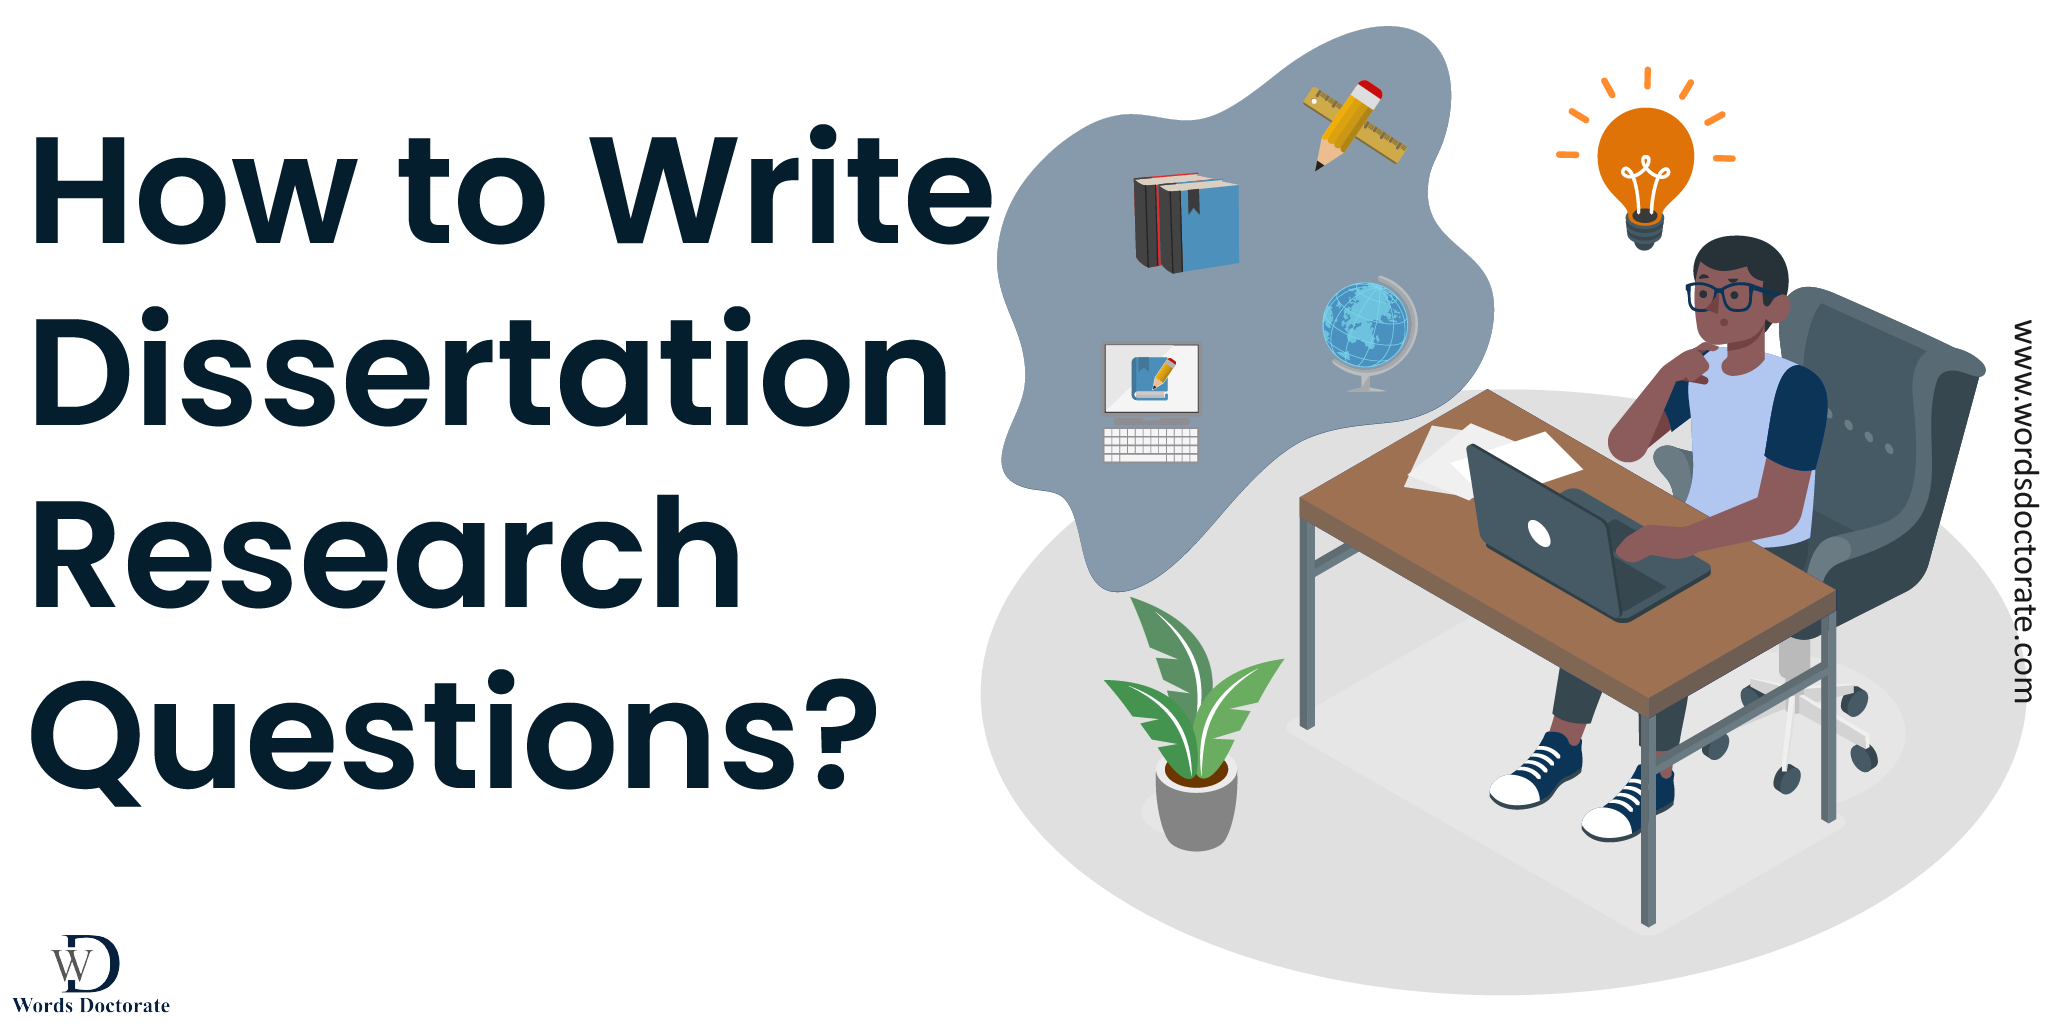 How to Write Dissertation Research Questions